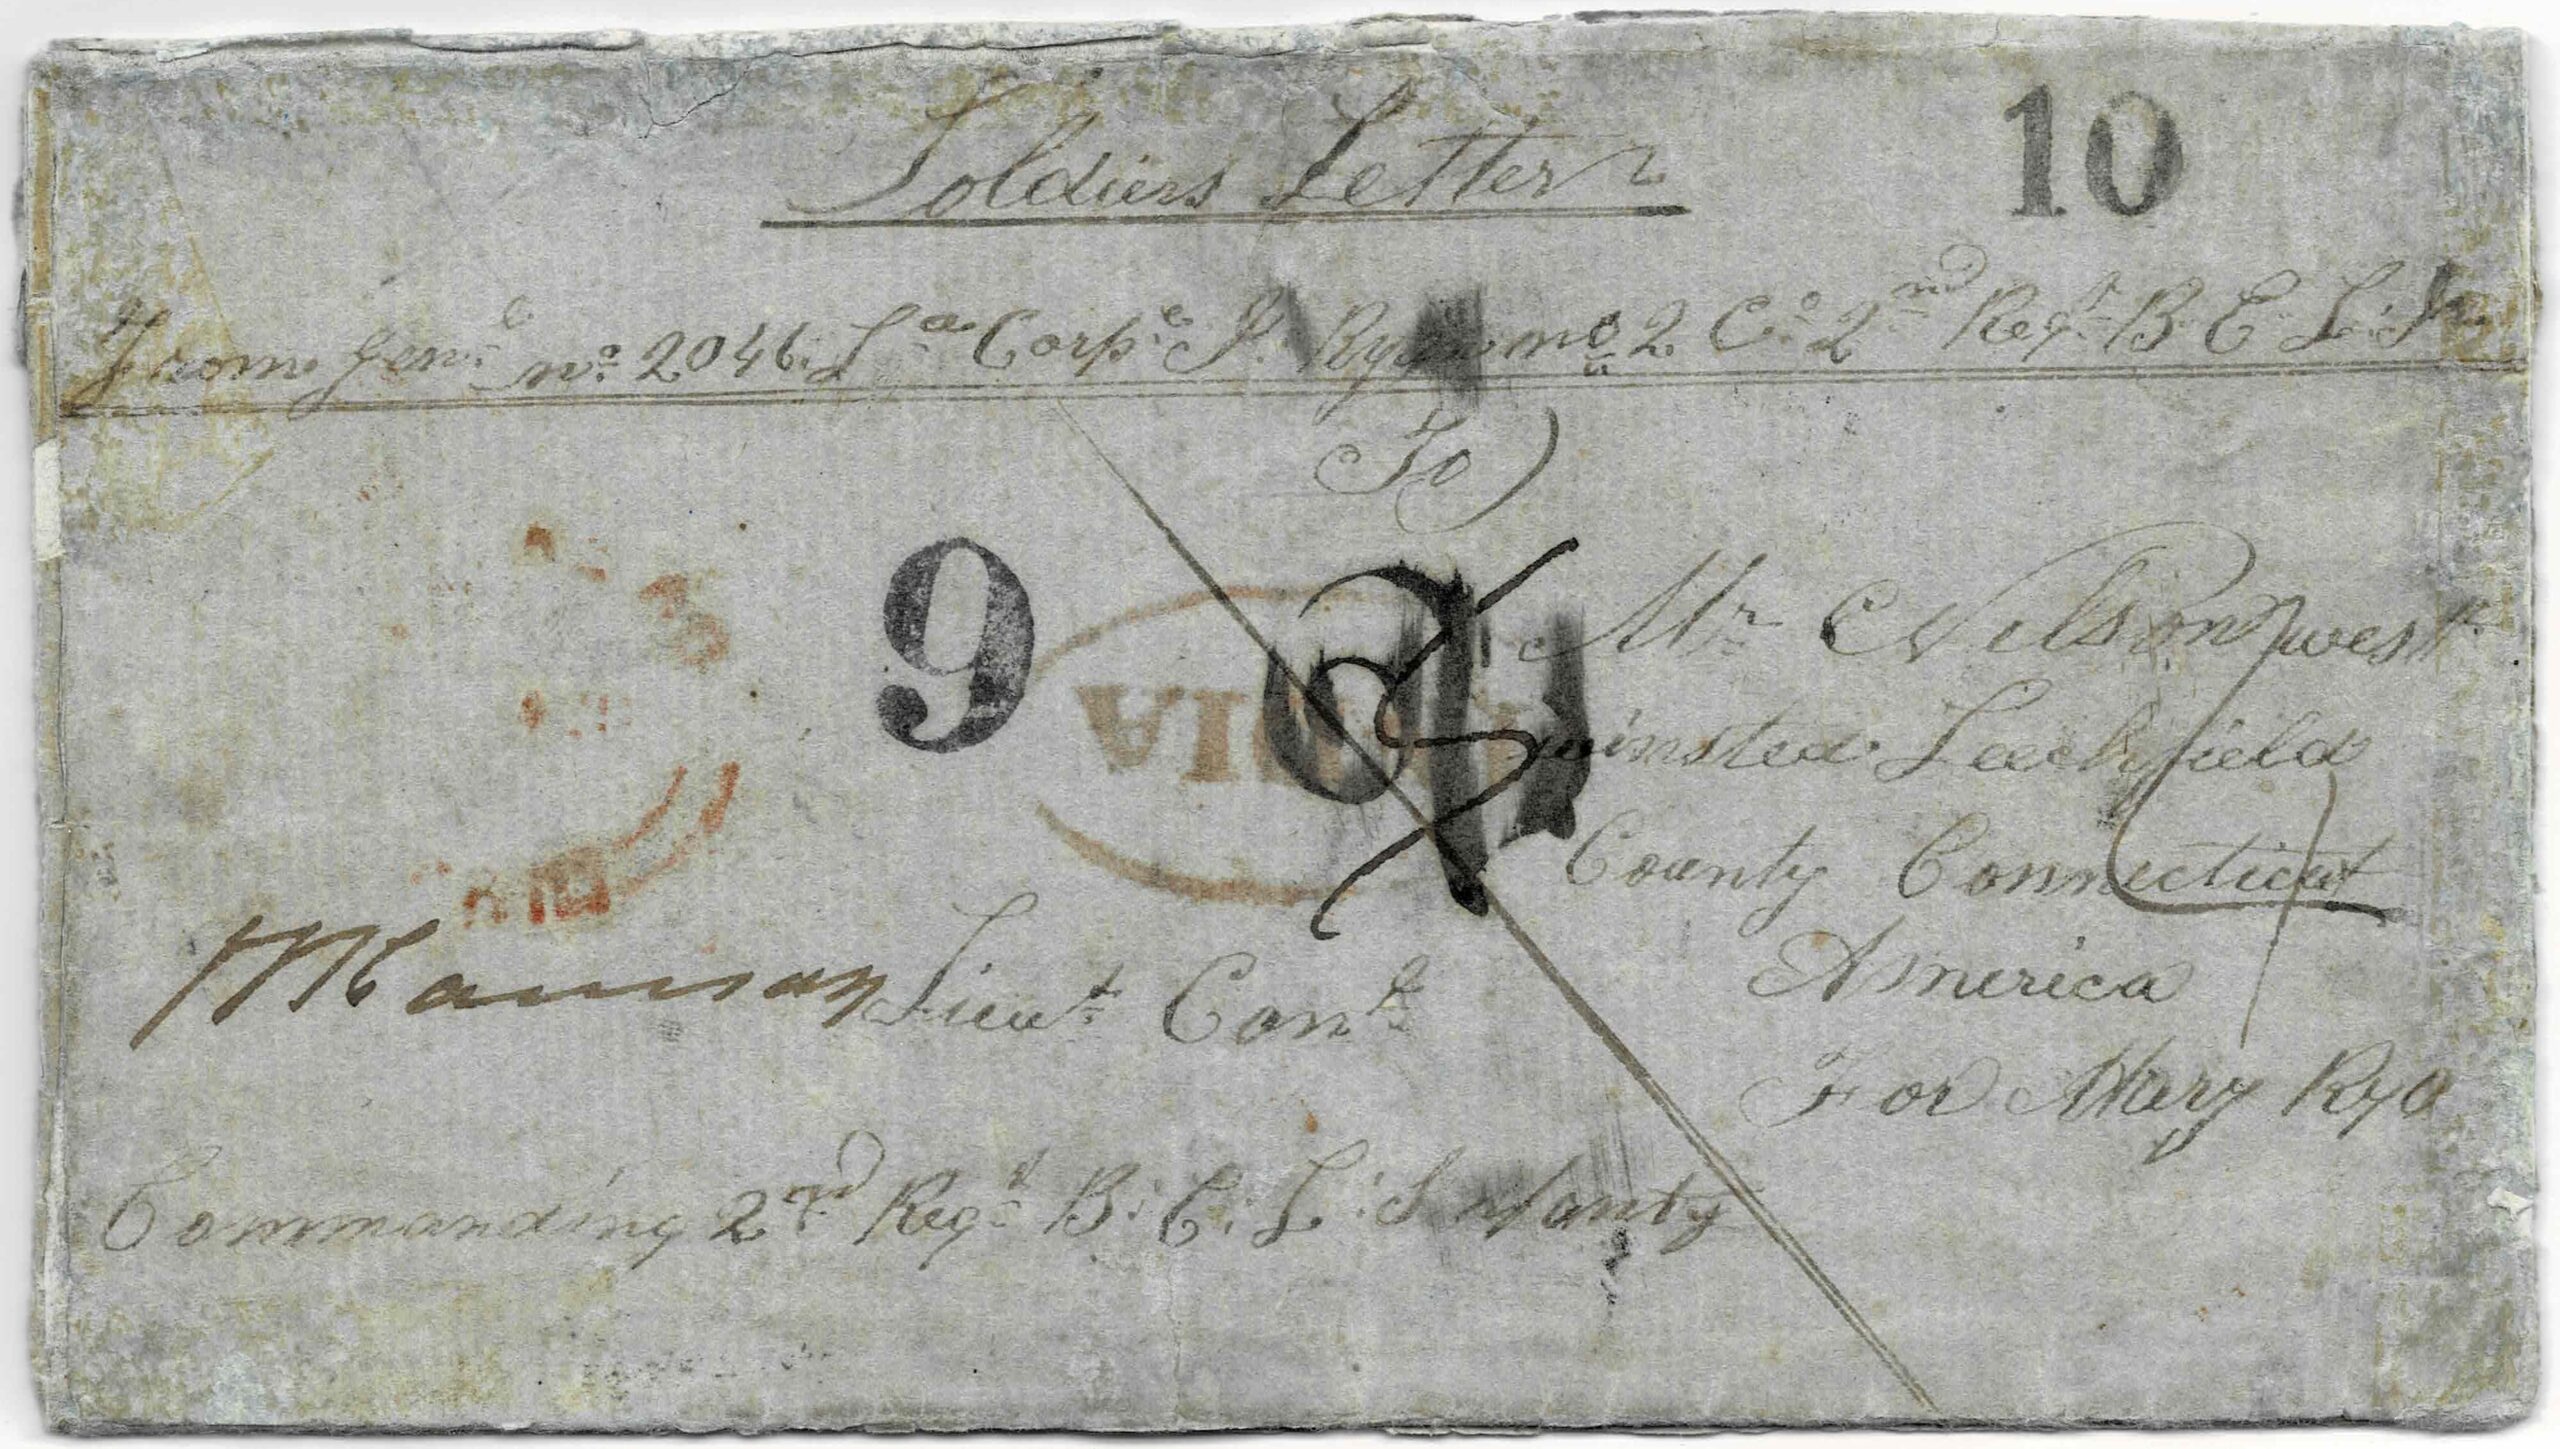 Figure 9. Soldiers' Letter Hyderabad Scinde to US Soldiers Front